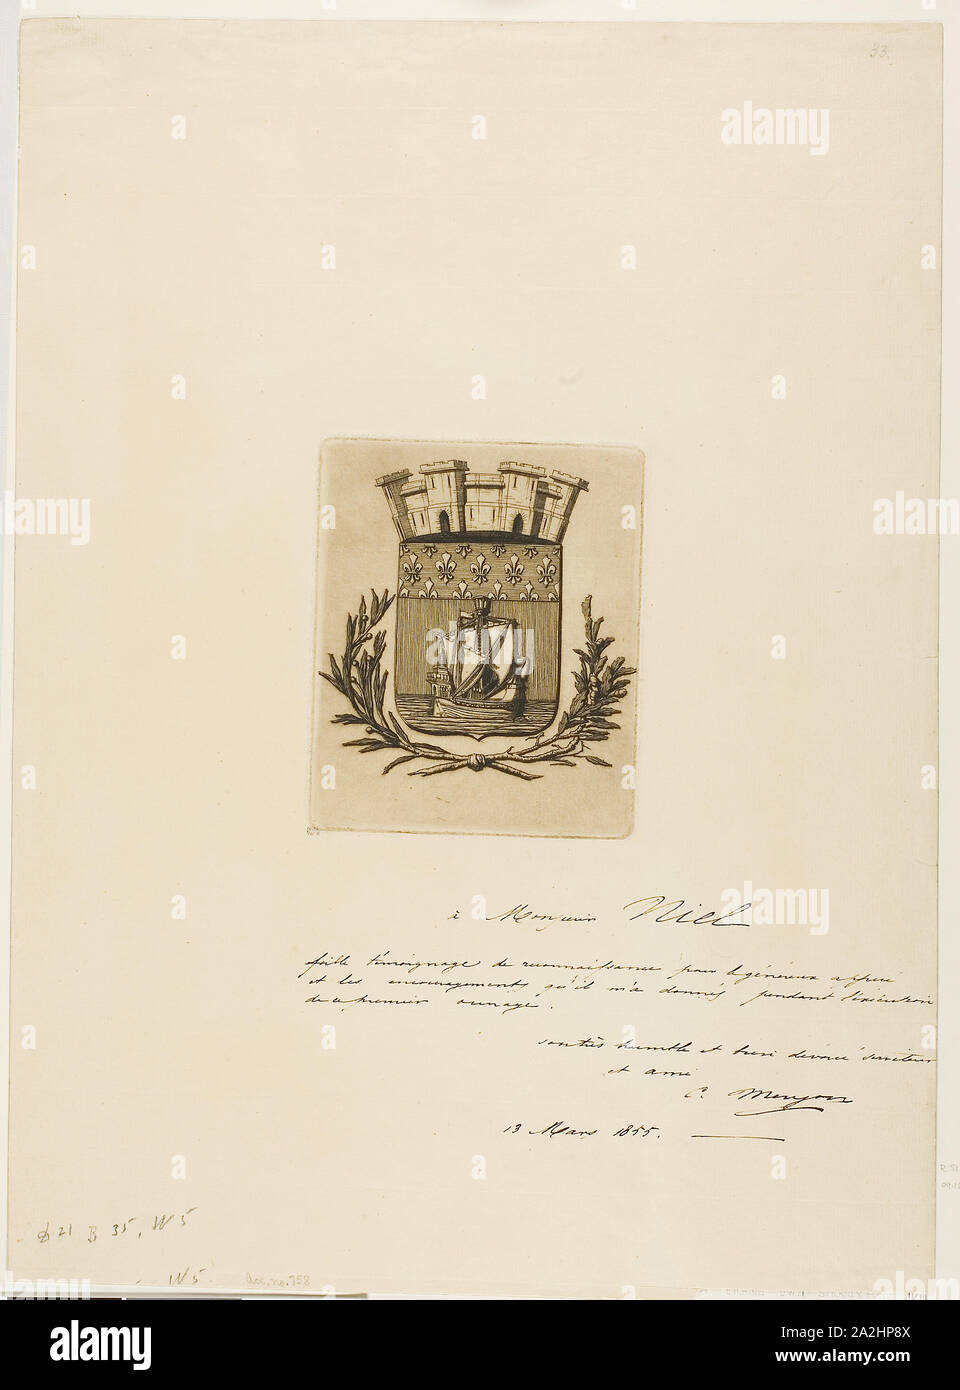 Arms Symbolical of the City of Paris, 1854, Charles Meryon, French, 1821-1868, France, Etching in warm black with plate tone on ivory laid paper, 136 × 112 mm (image), 136 × 112 mm (plate), 440 × 322 mm (sheet Stock Photo